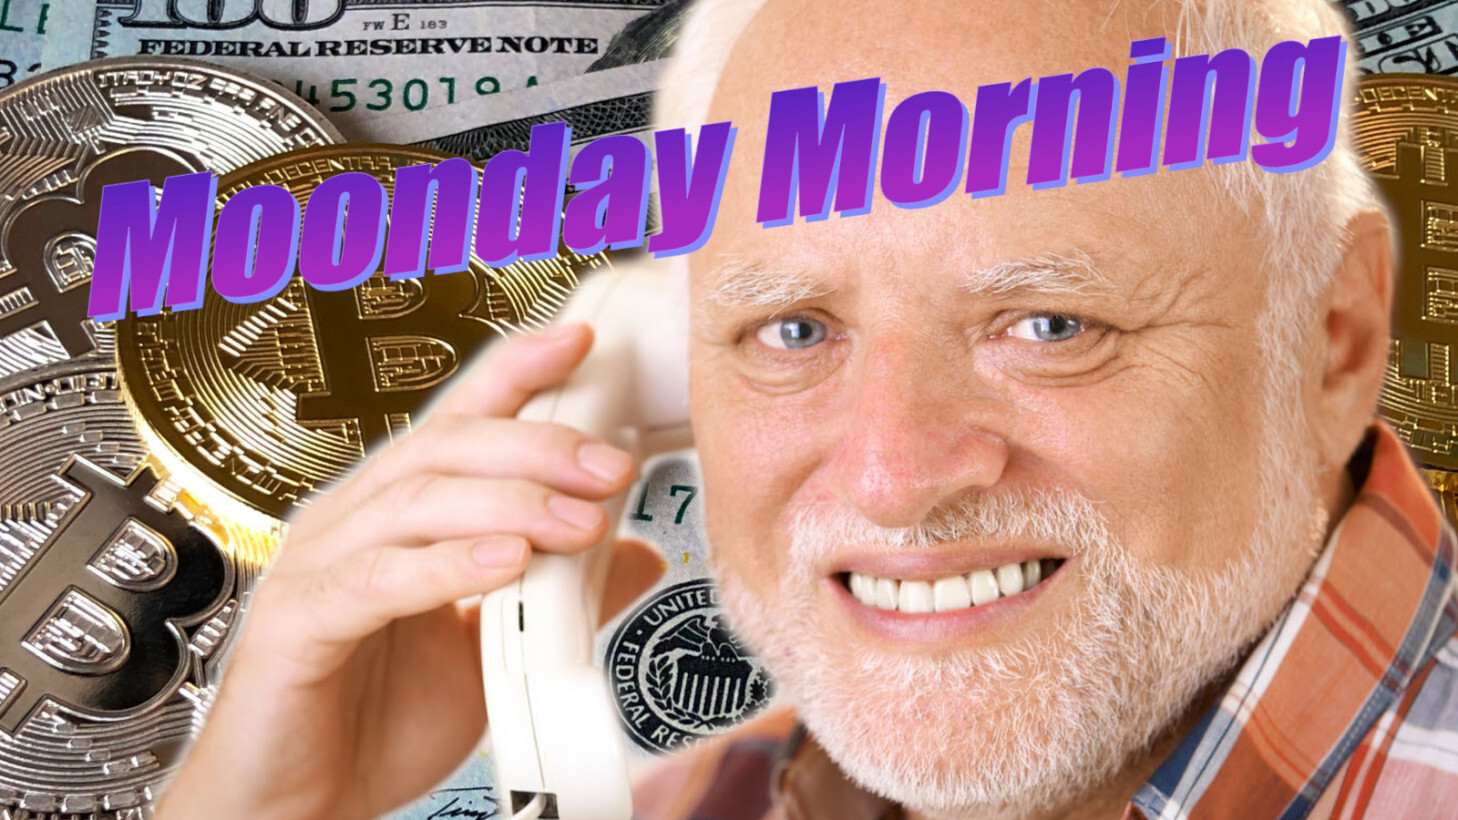 Moonday Mornings: The US is suing a cryptocurrency exchange owner to the tune of $100M